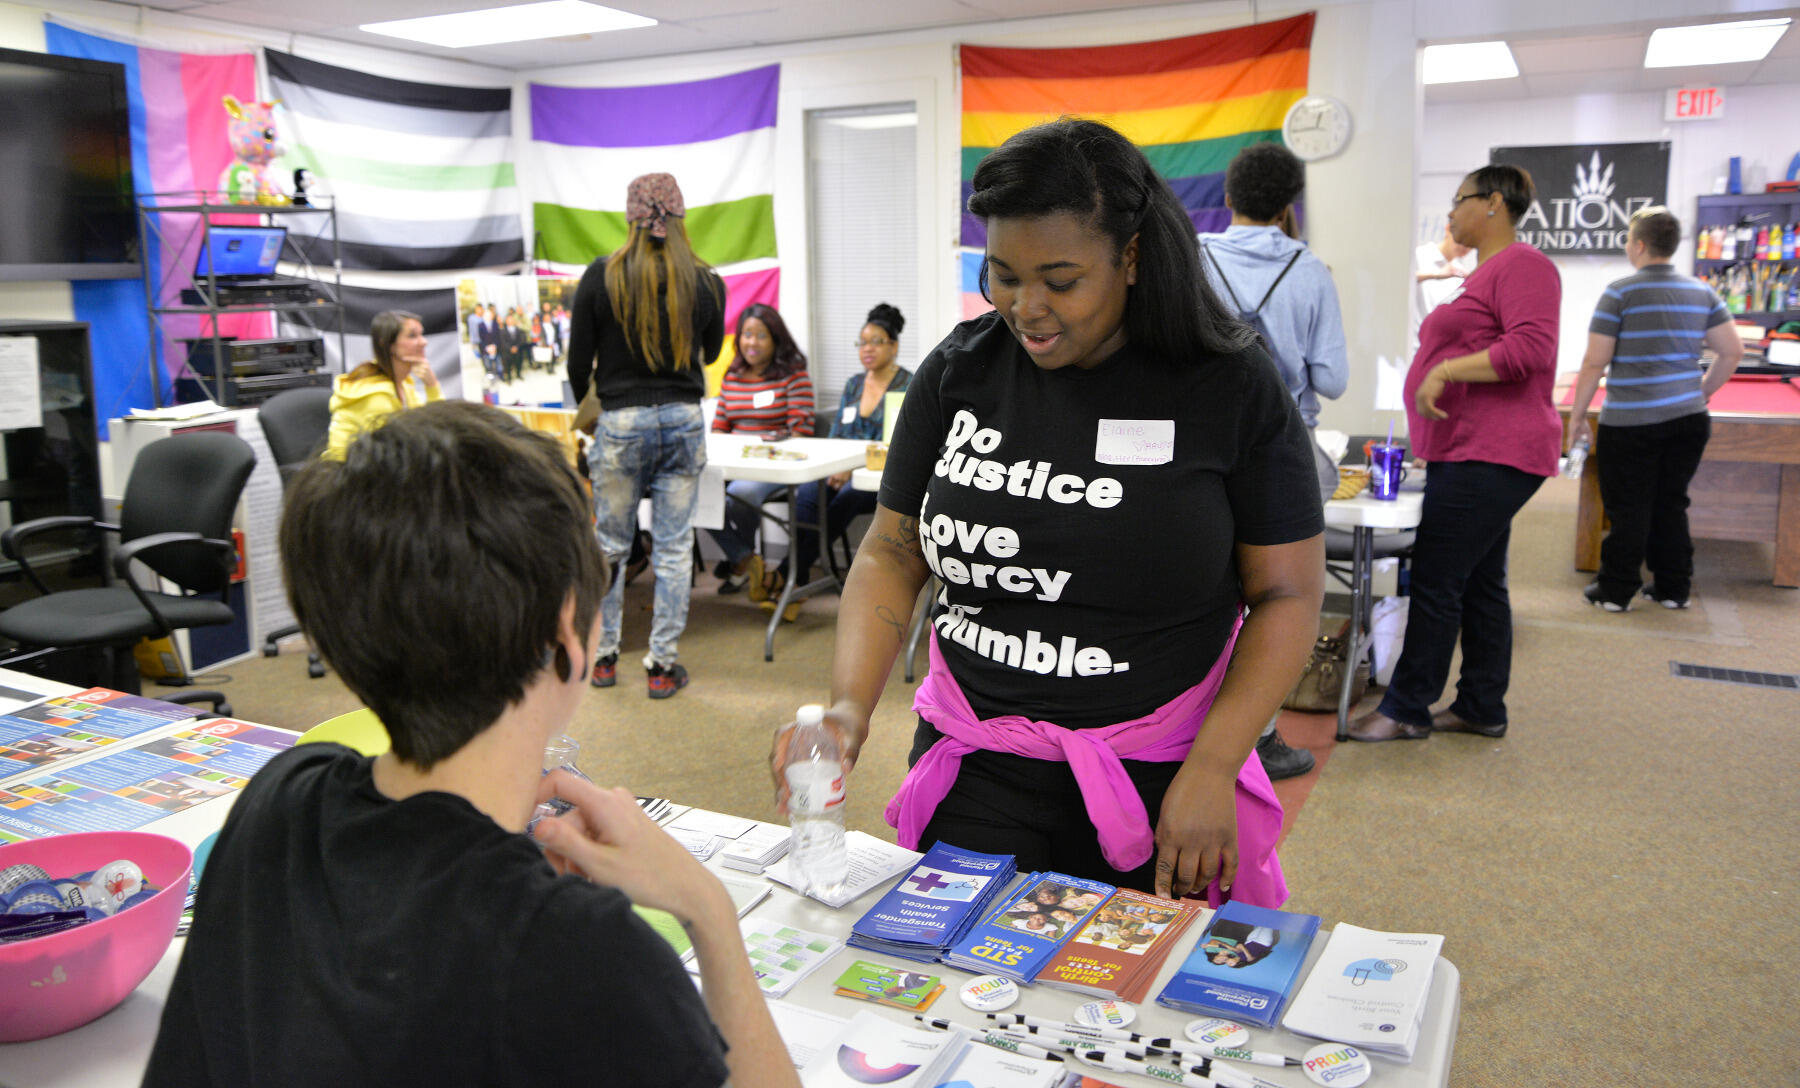 Elaine Williams, a senior social work major at VCU and a member of Advocates for Richmond Youth, talks with representatives of Richmond-area nonprofits and service providers at the pop-up drop-in center at Side By Side.